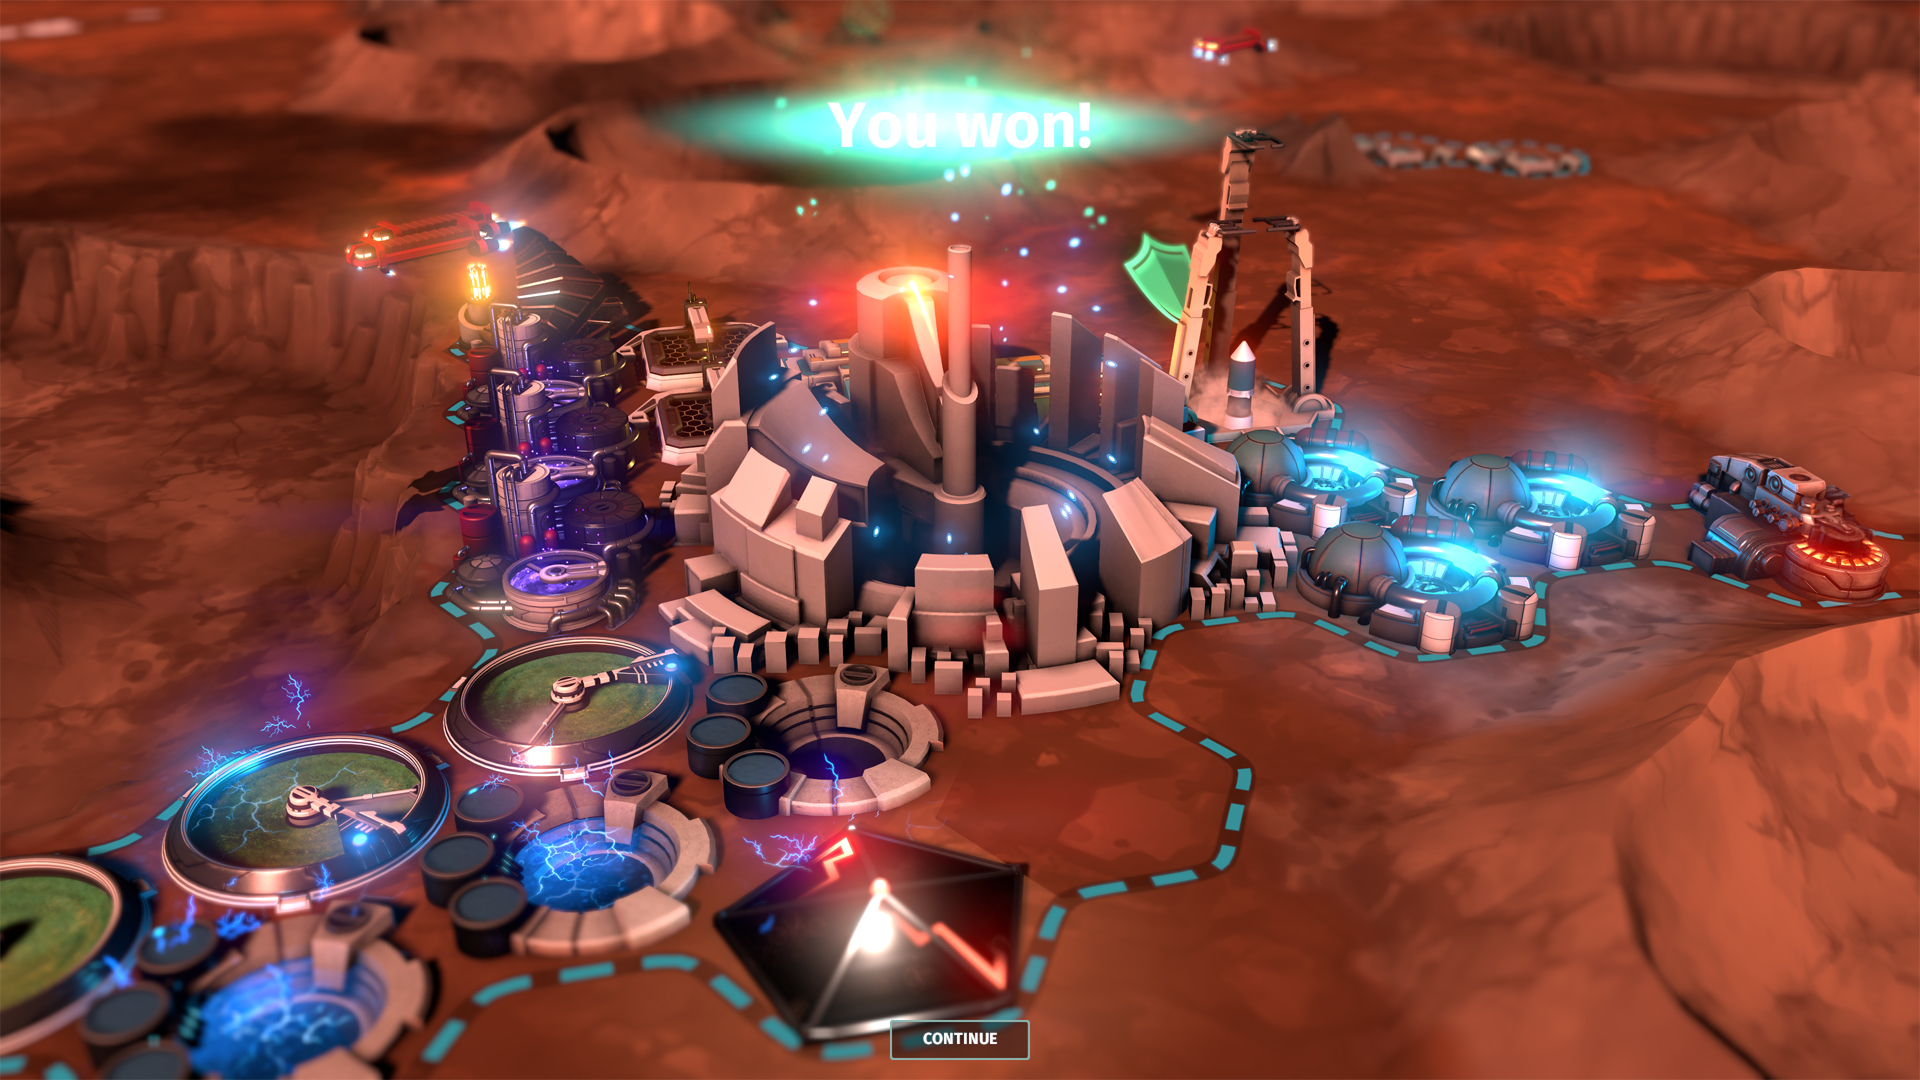 offworld trading company proof of employment guide